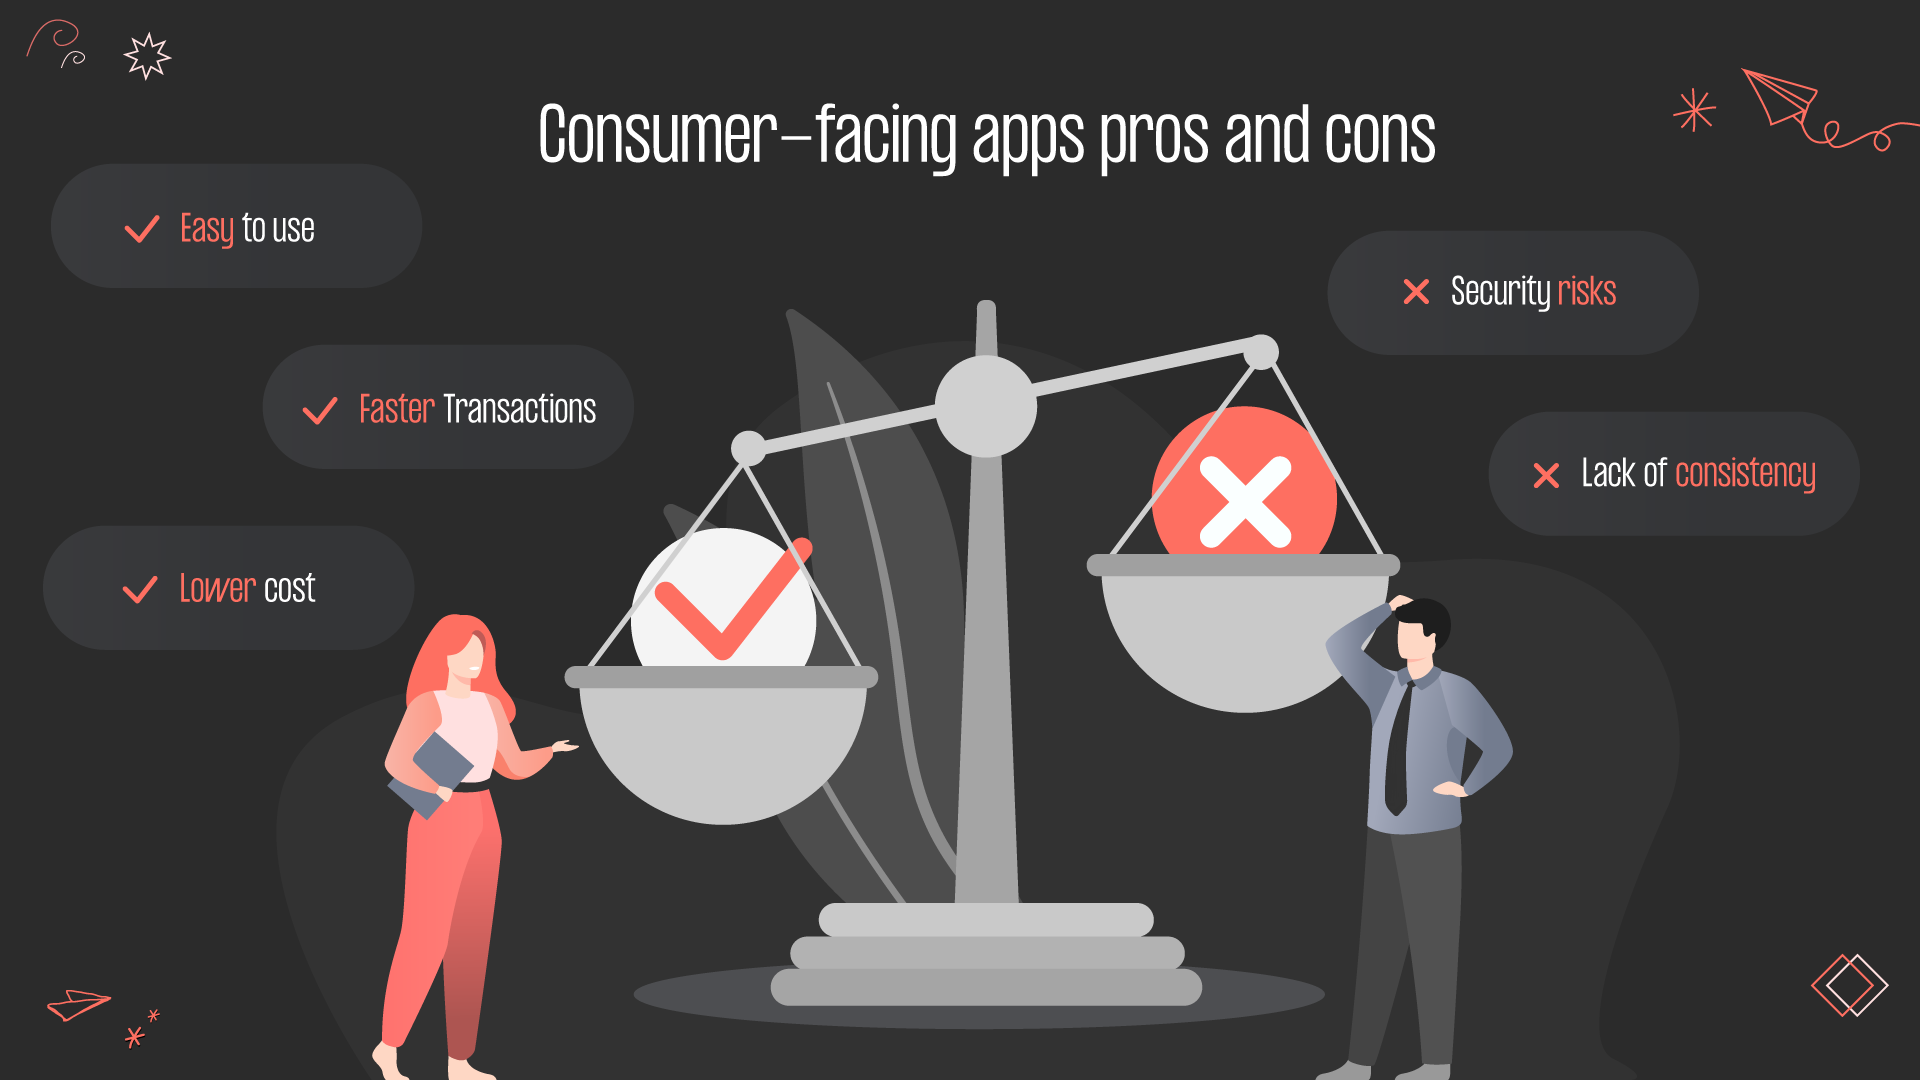 Consumer-facing apps pros and cons